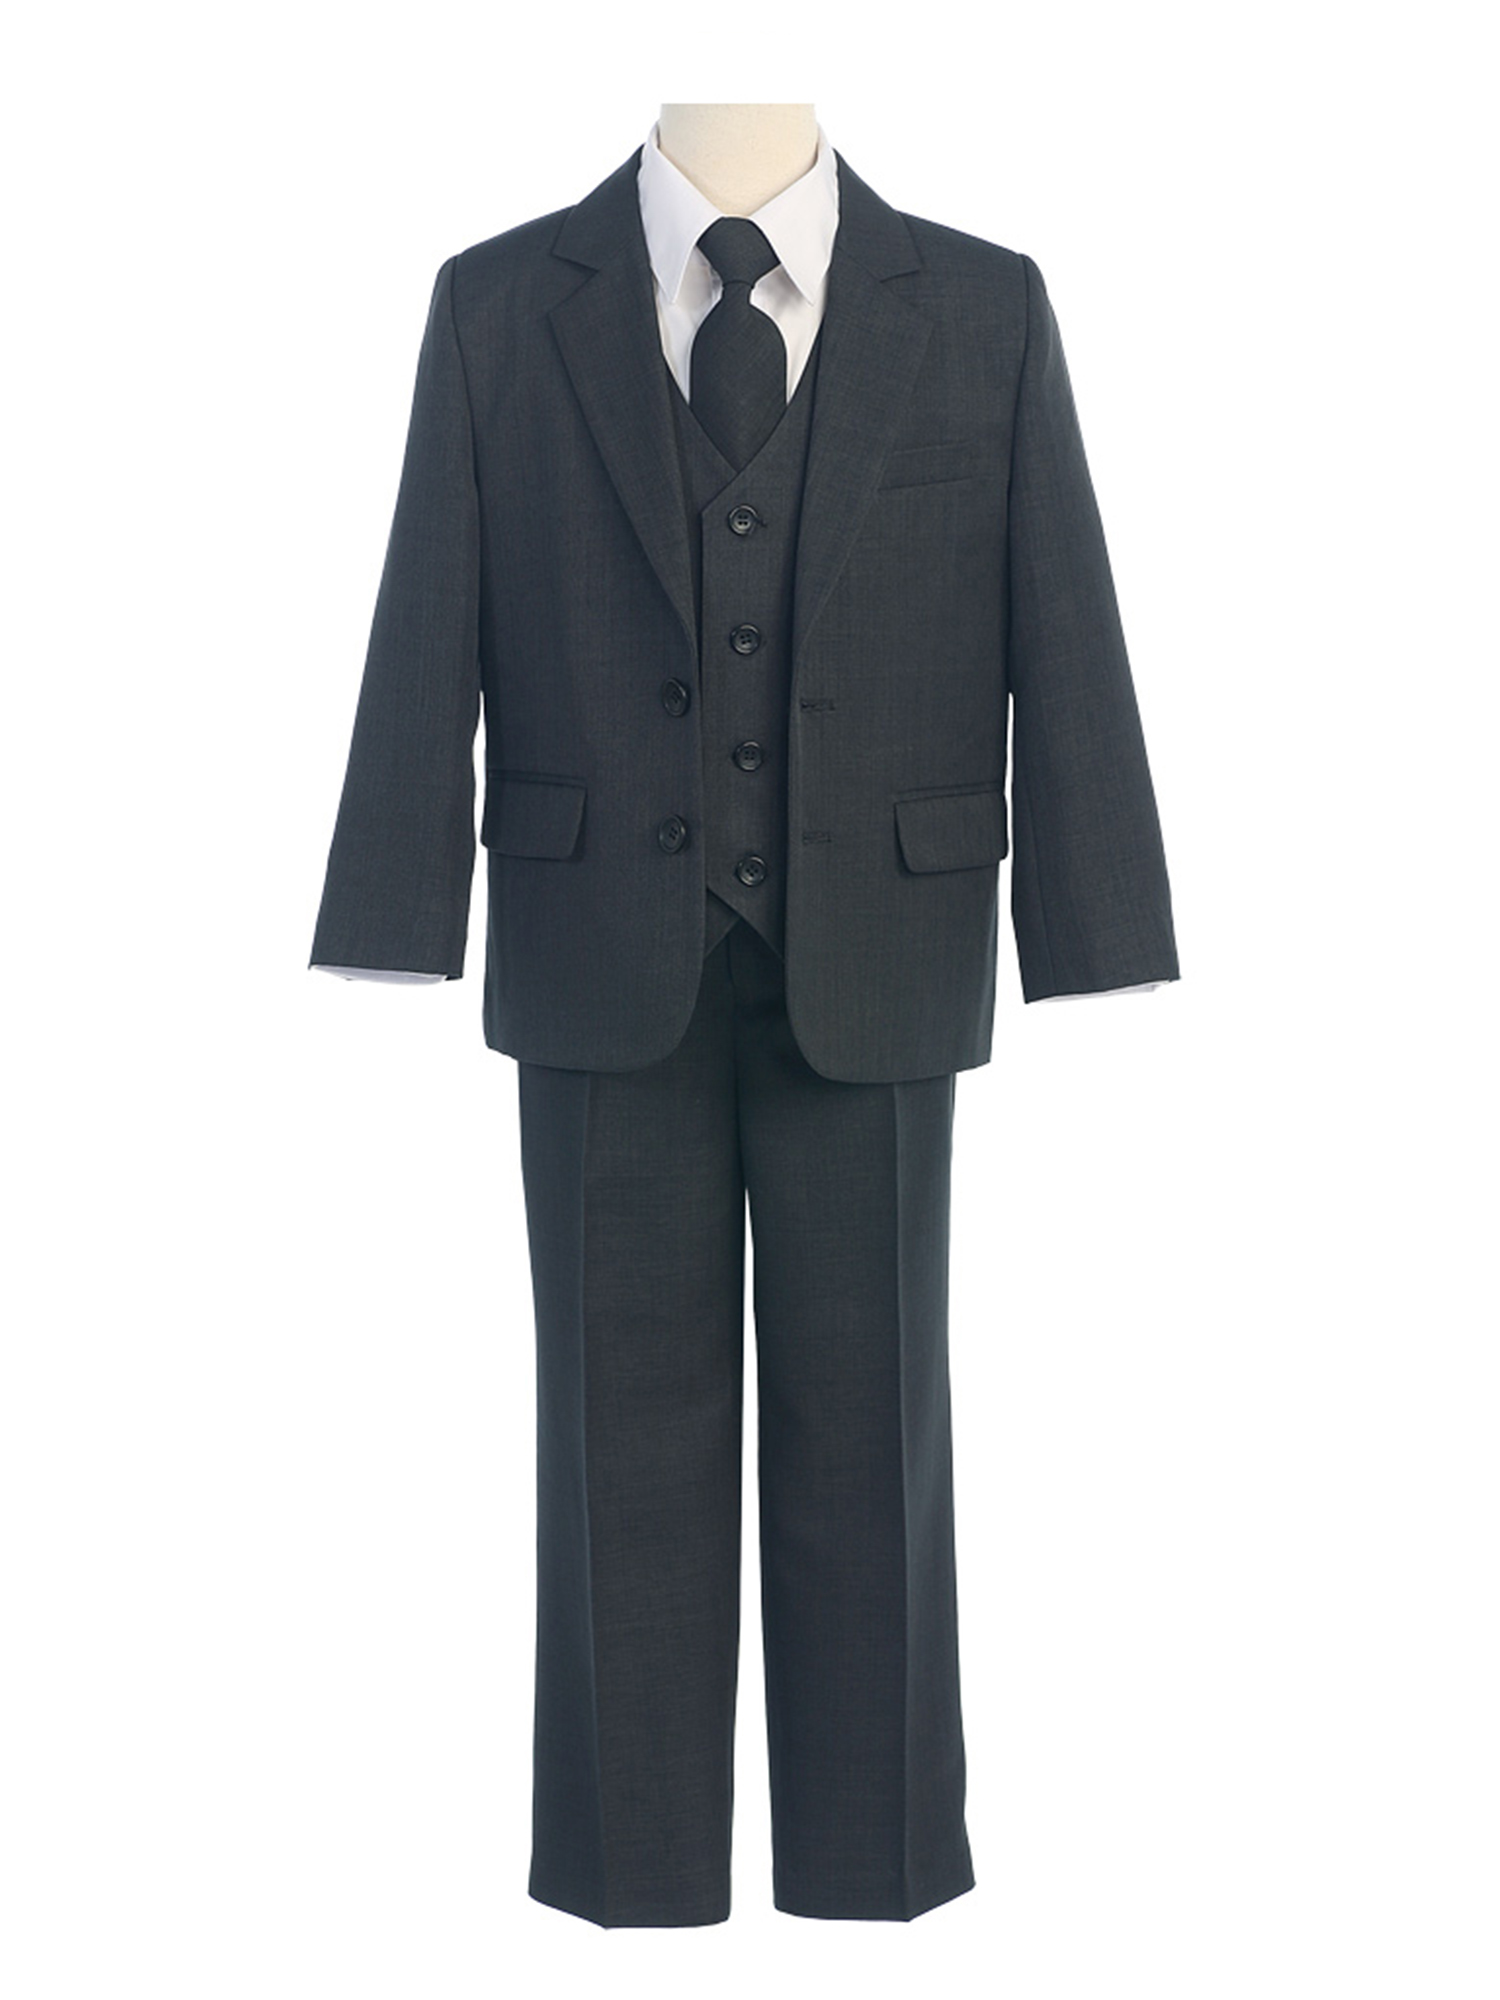 COLE Boys Suit with Shirt and Vest (5-Piece) - Charcoal Grey - Size 16